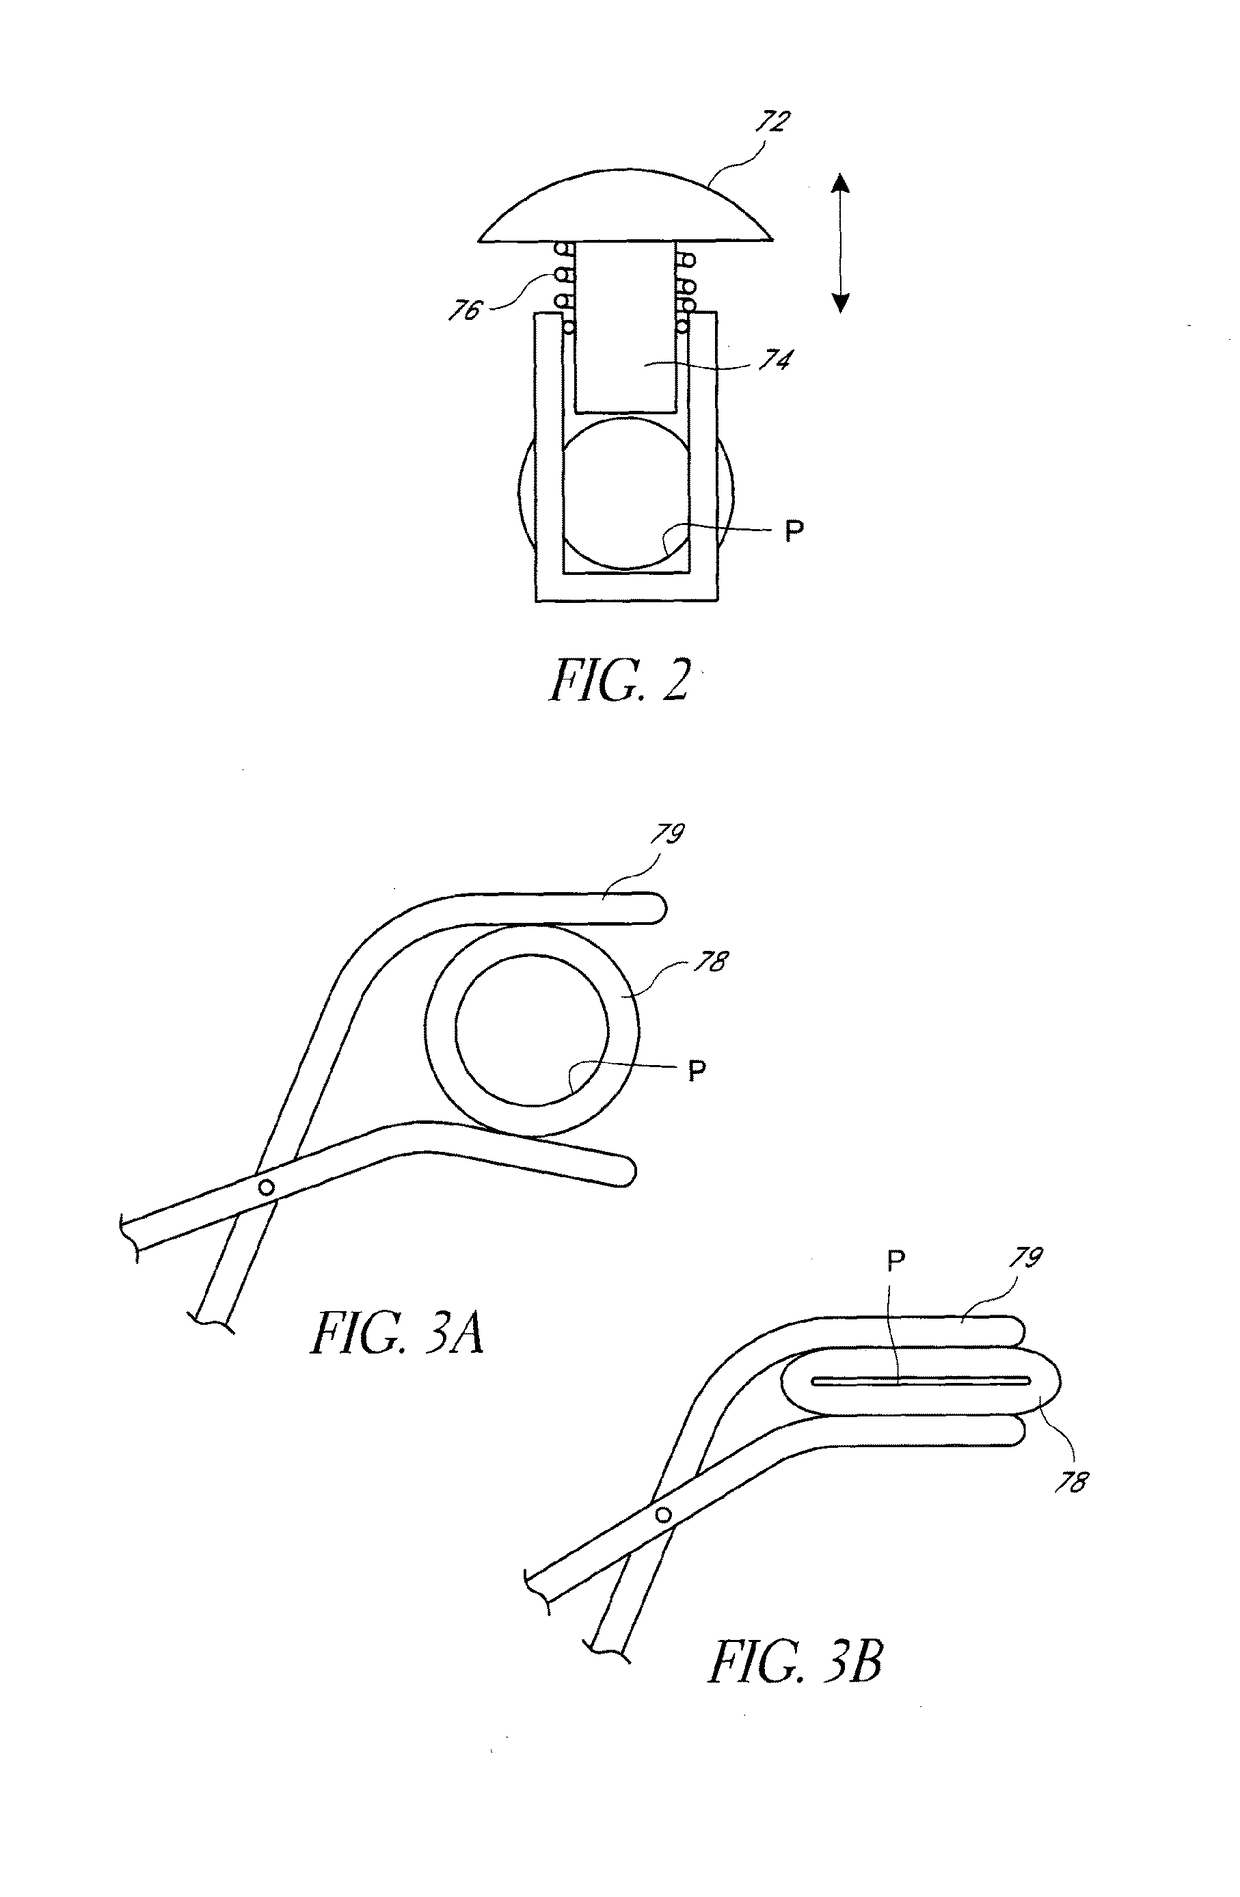 Combination CPAP and resuscitation systems and methods